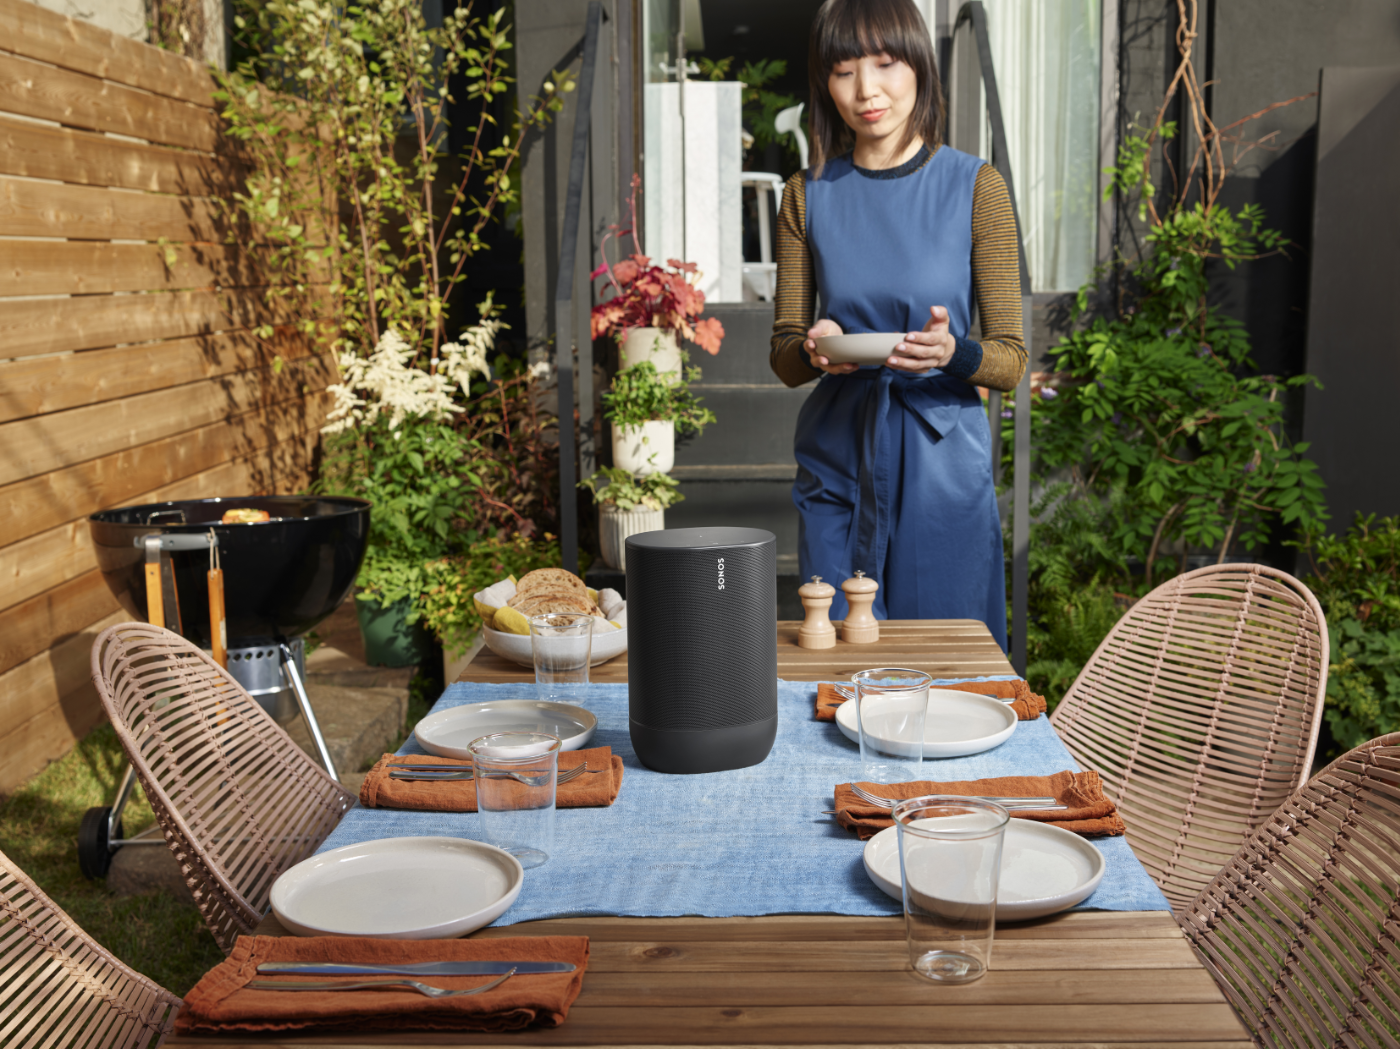 Move_Black-Lifestyle-Urban_Apartment__Outdoor_Dining-with_Cast-Q3FY20_MST-MST_JPEG_fid109371